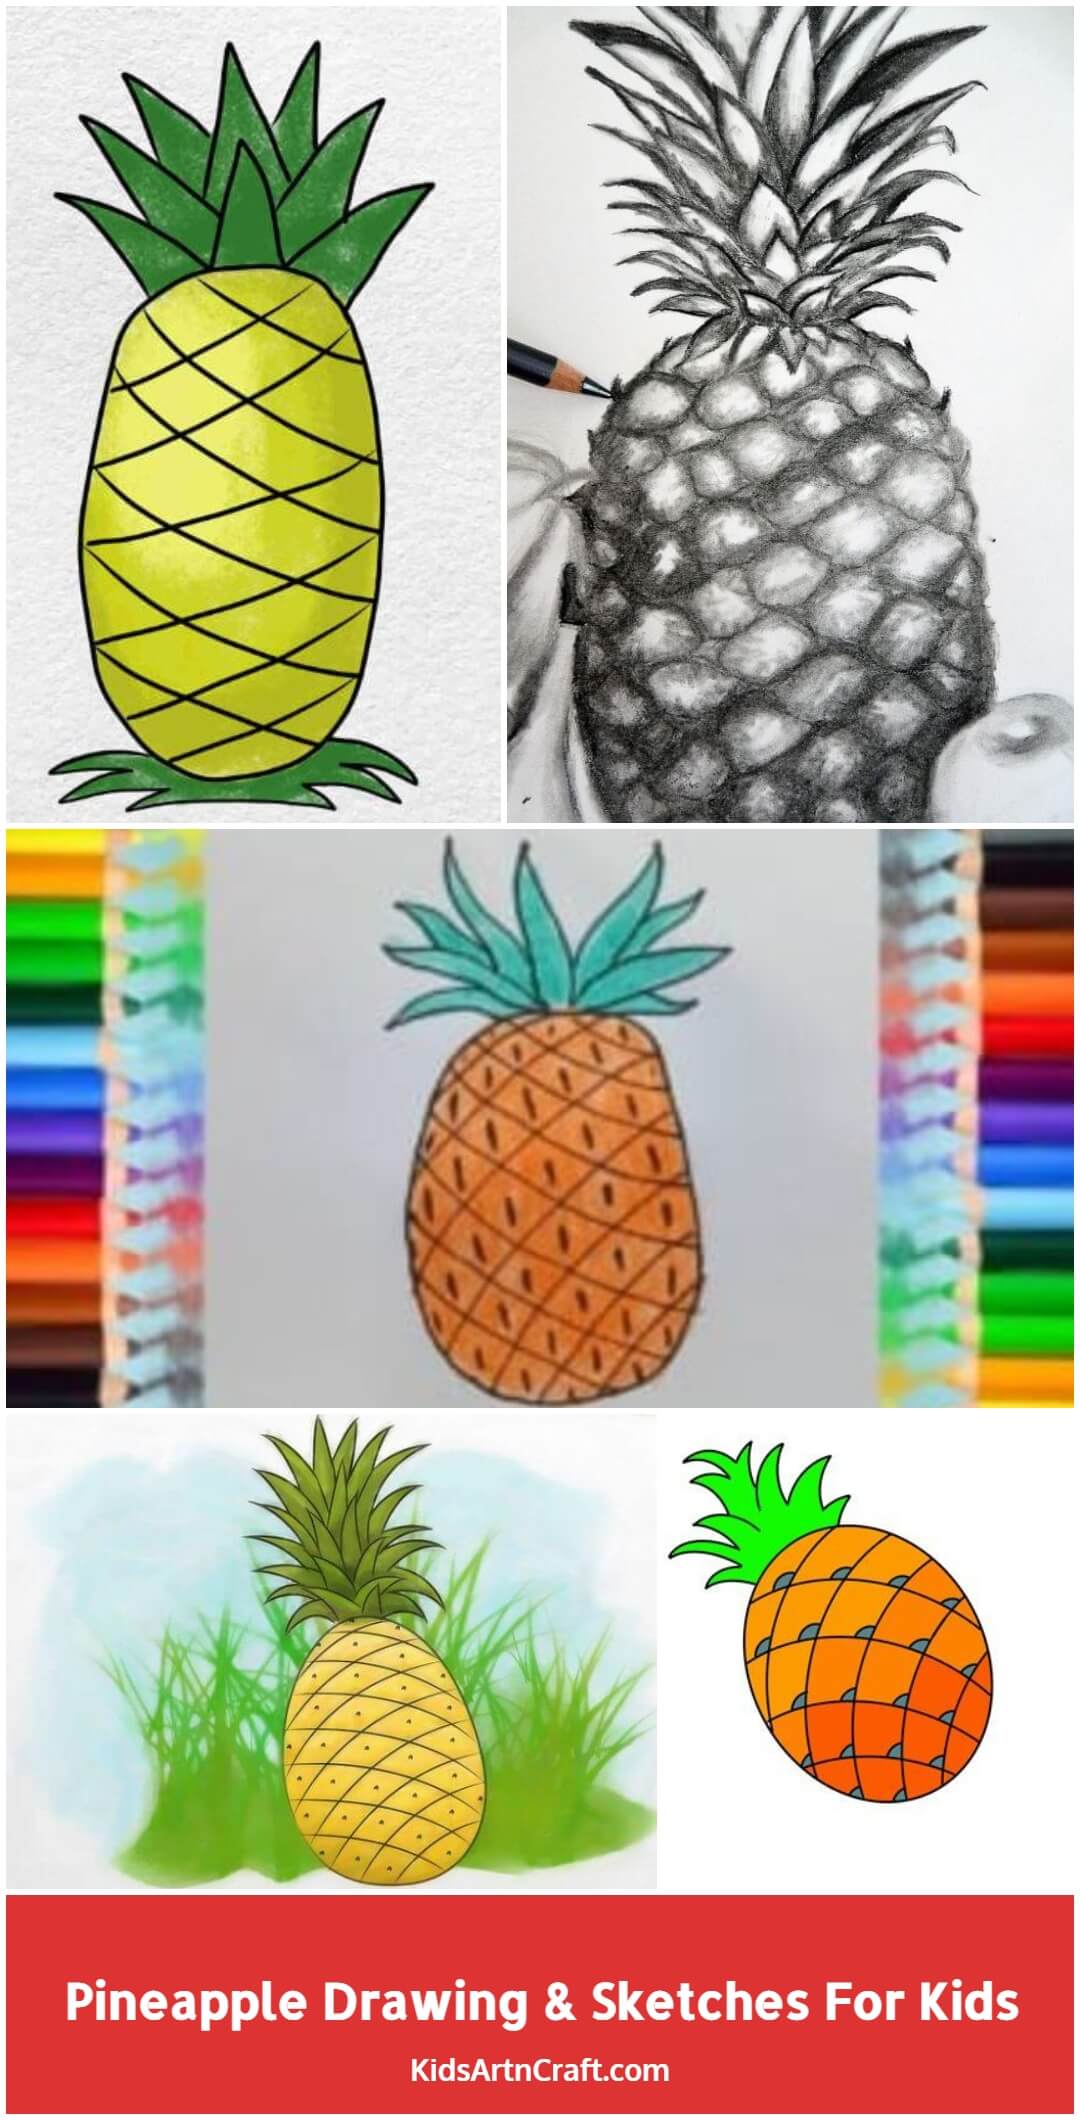 Pineapple Drawing & Sketches For Kids